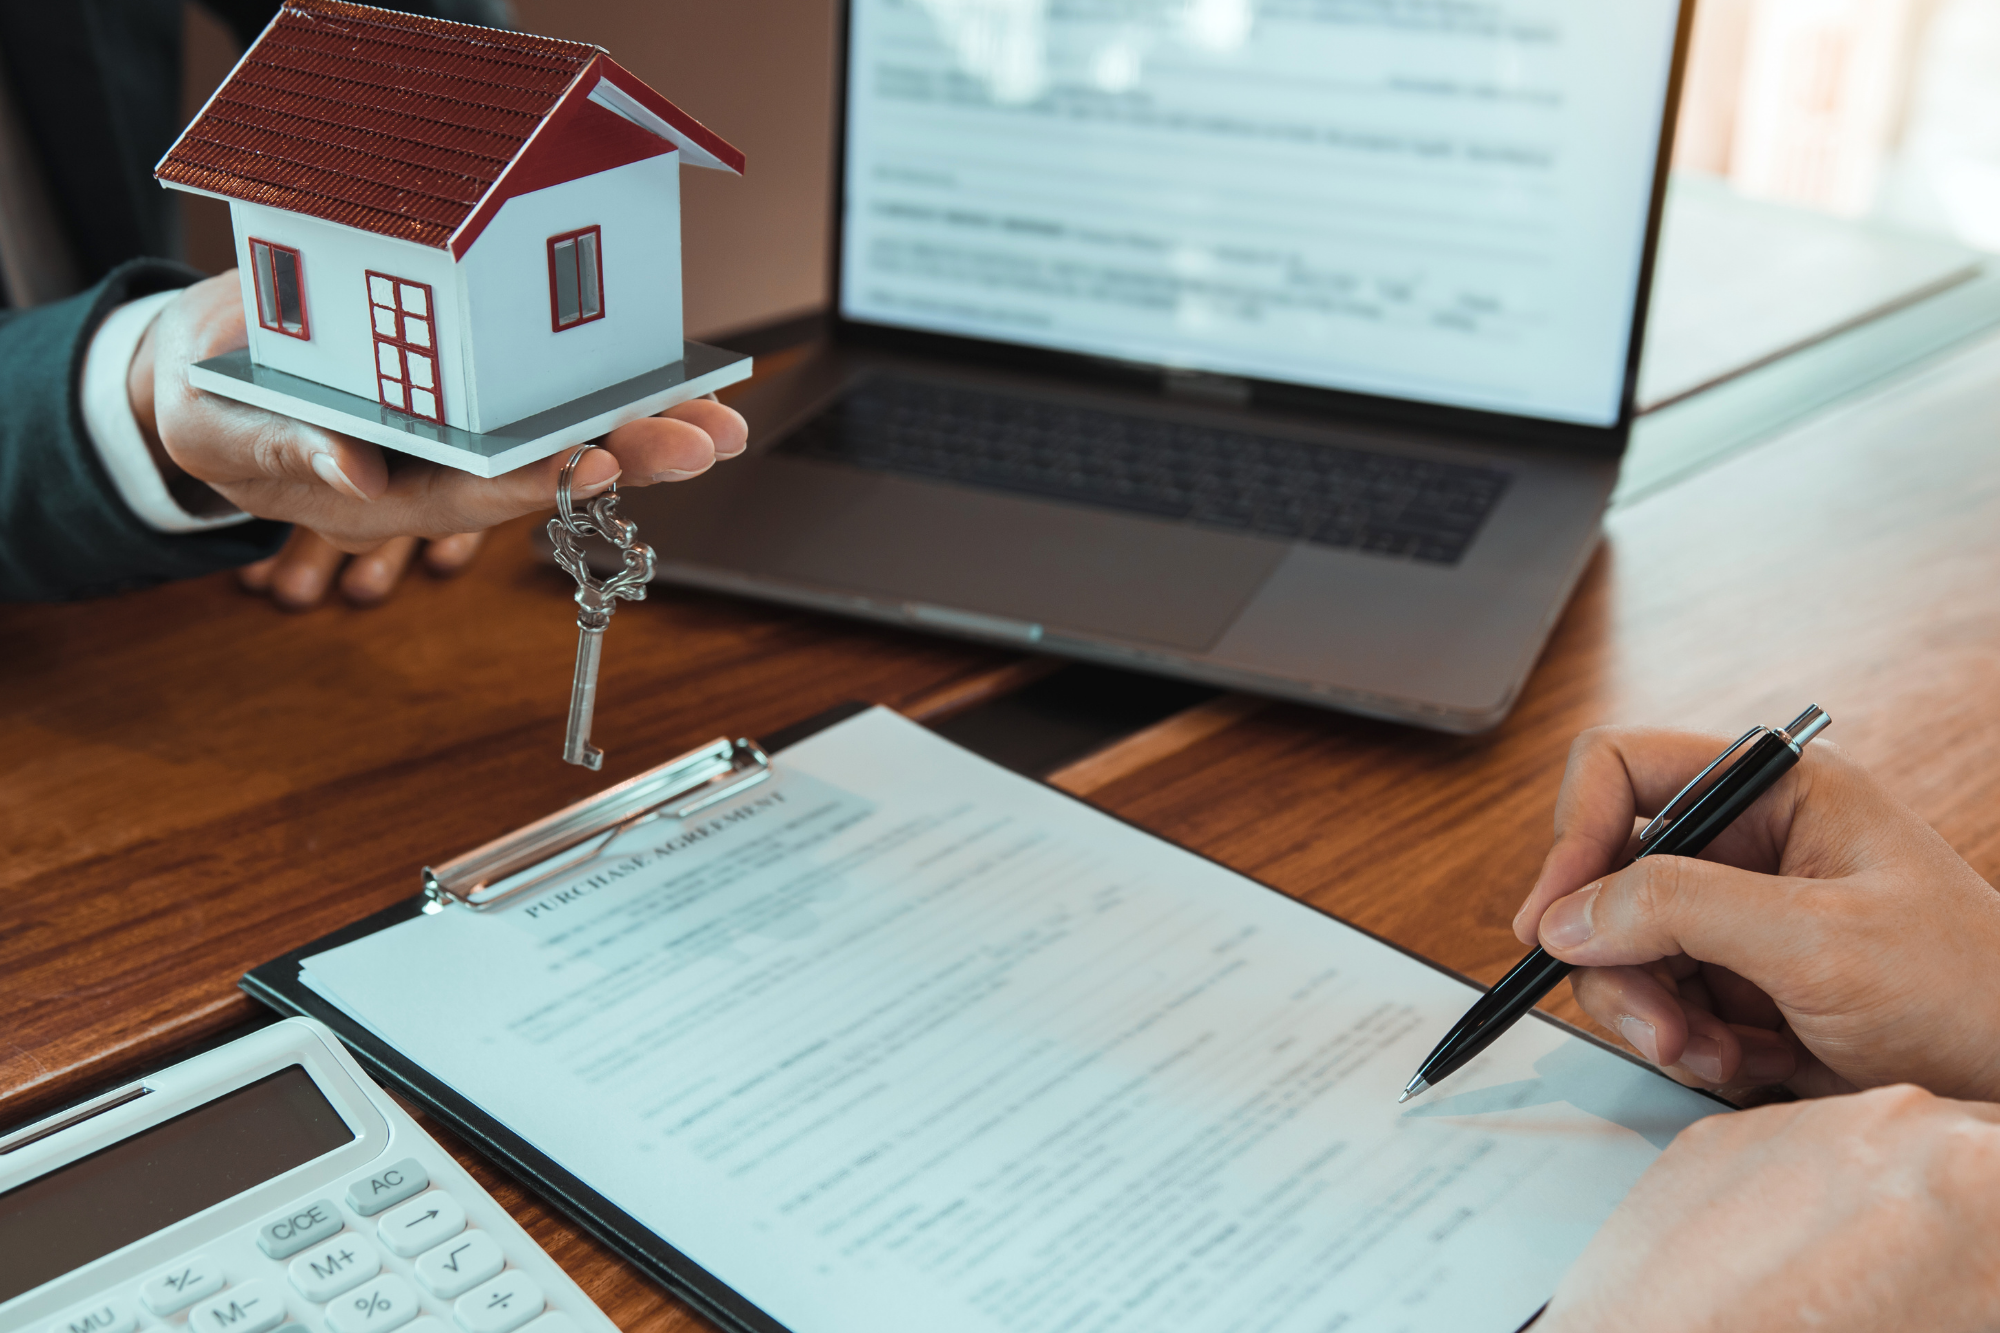 E-CONTRACTS IN REAL ESTATE TRANSACTIONS